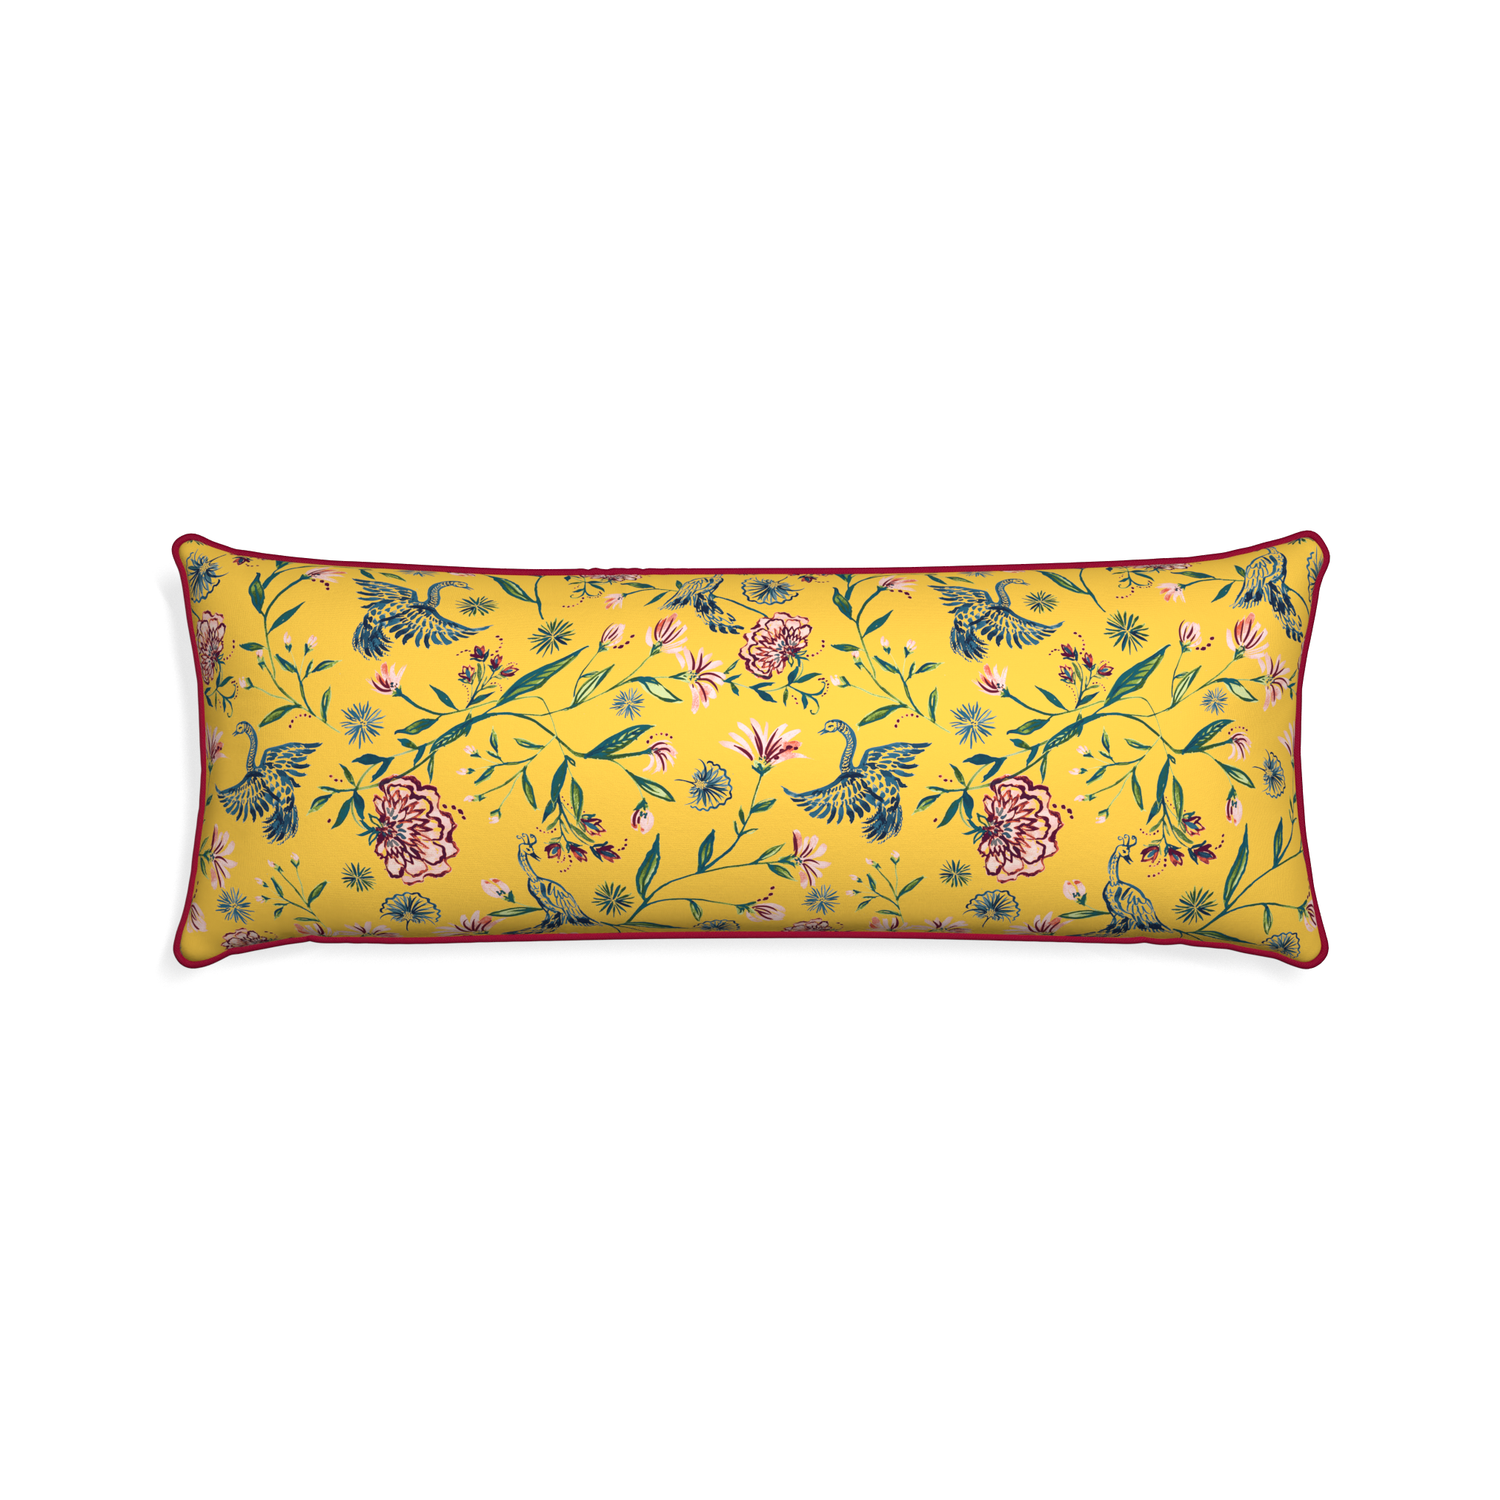 Xl-lumbar daphne canary custom pillow with raspberry piping on white background